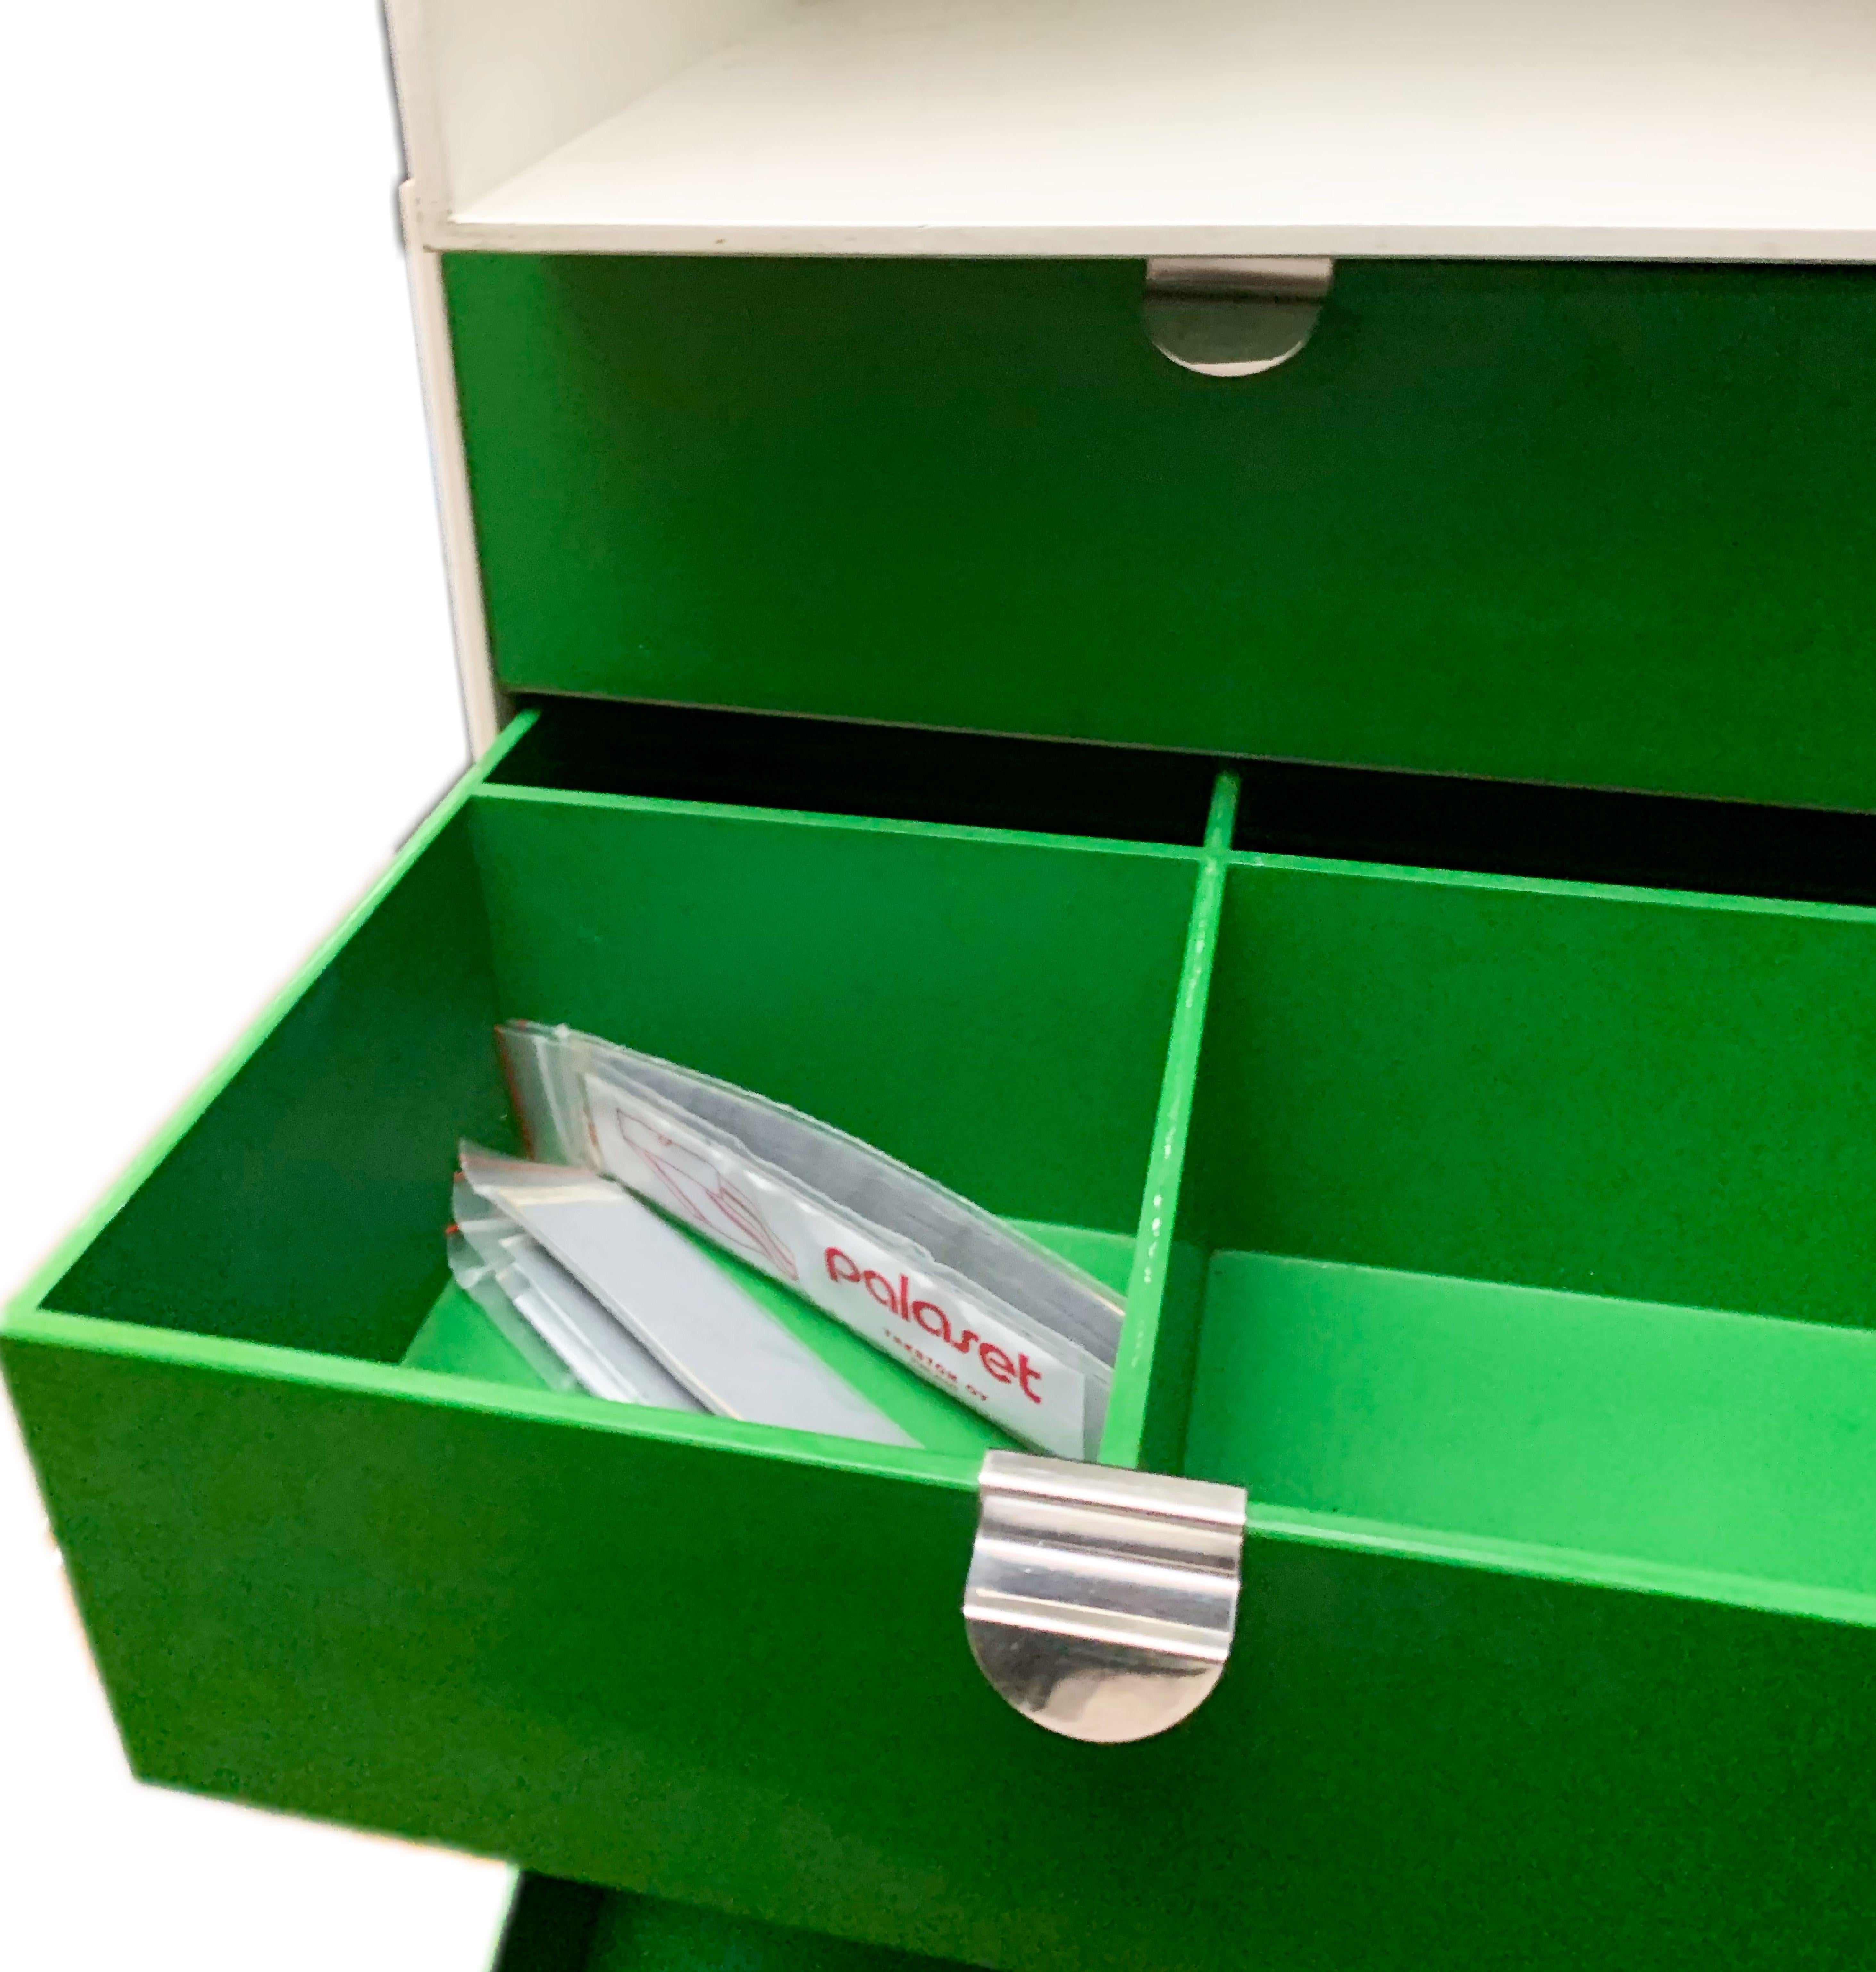 Vintage Palaset modular storage box set of 4 Scandinavian Modern, Finland, 1972-1973, green and white.
Palaset Palanox, multicolored stackable boxes that allow you to build your own shelf, only produced for a few years in the early 1970s. During his